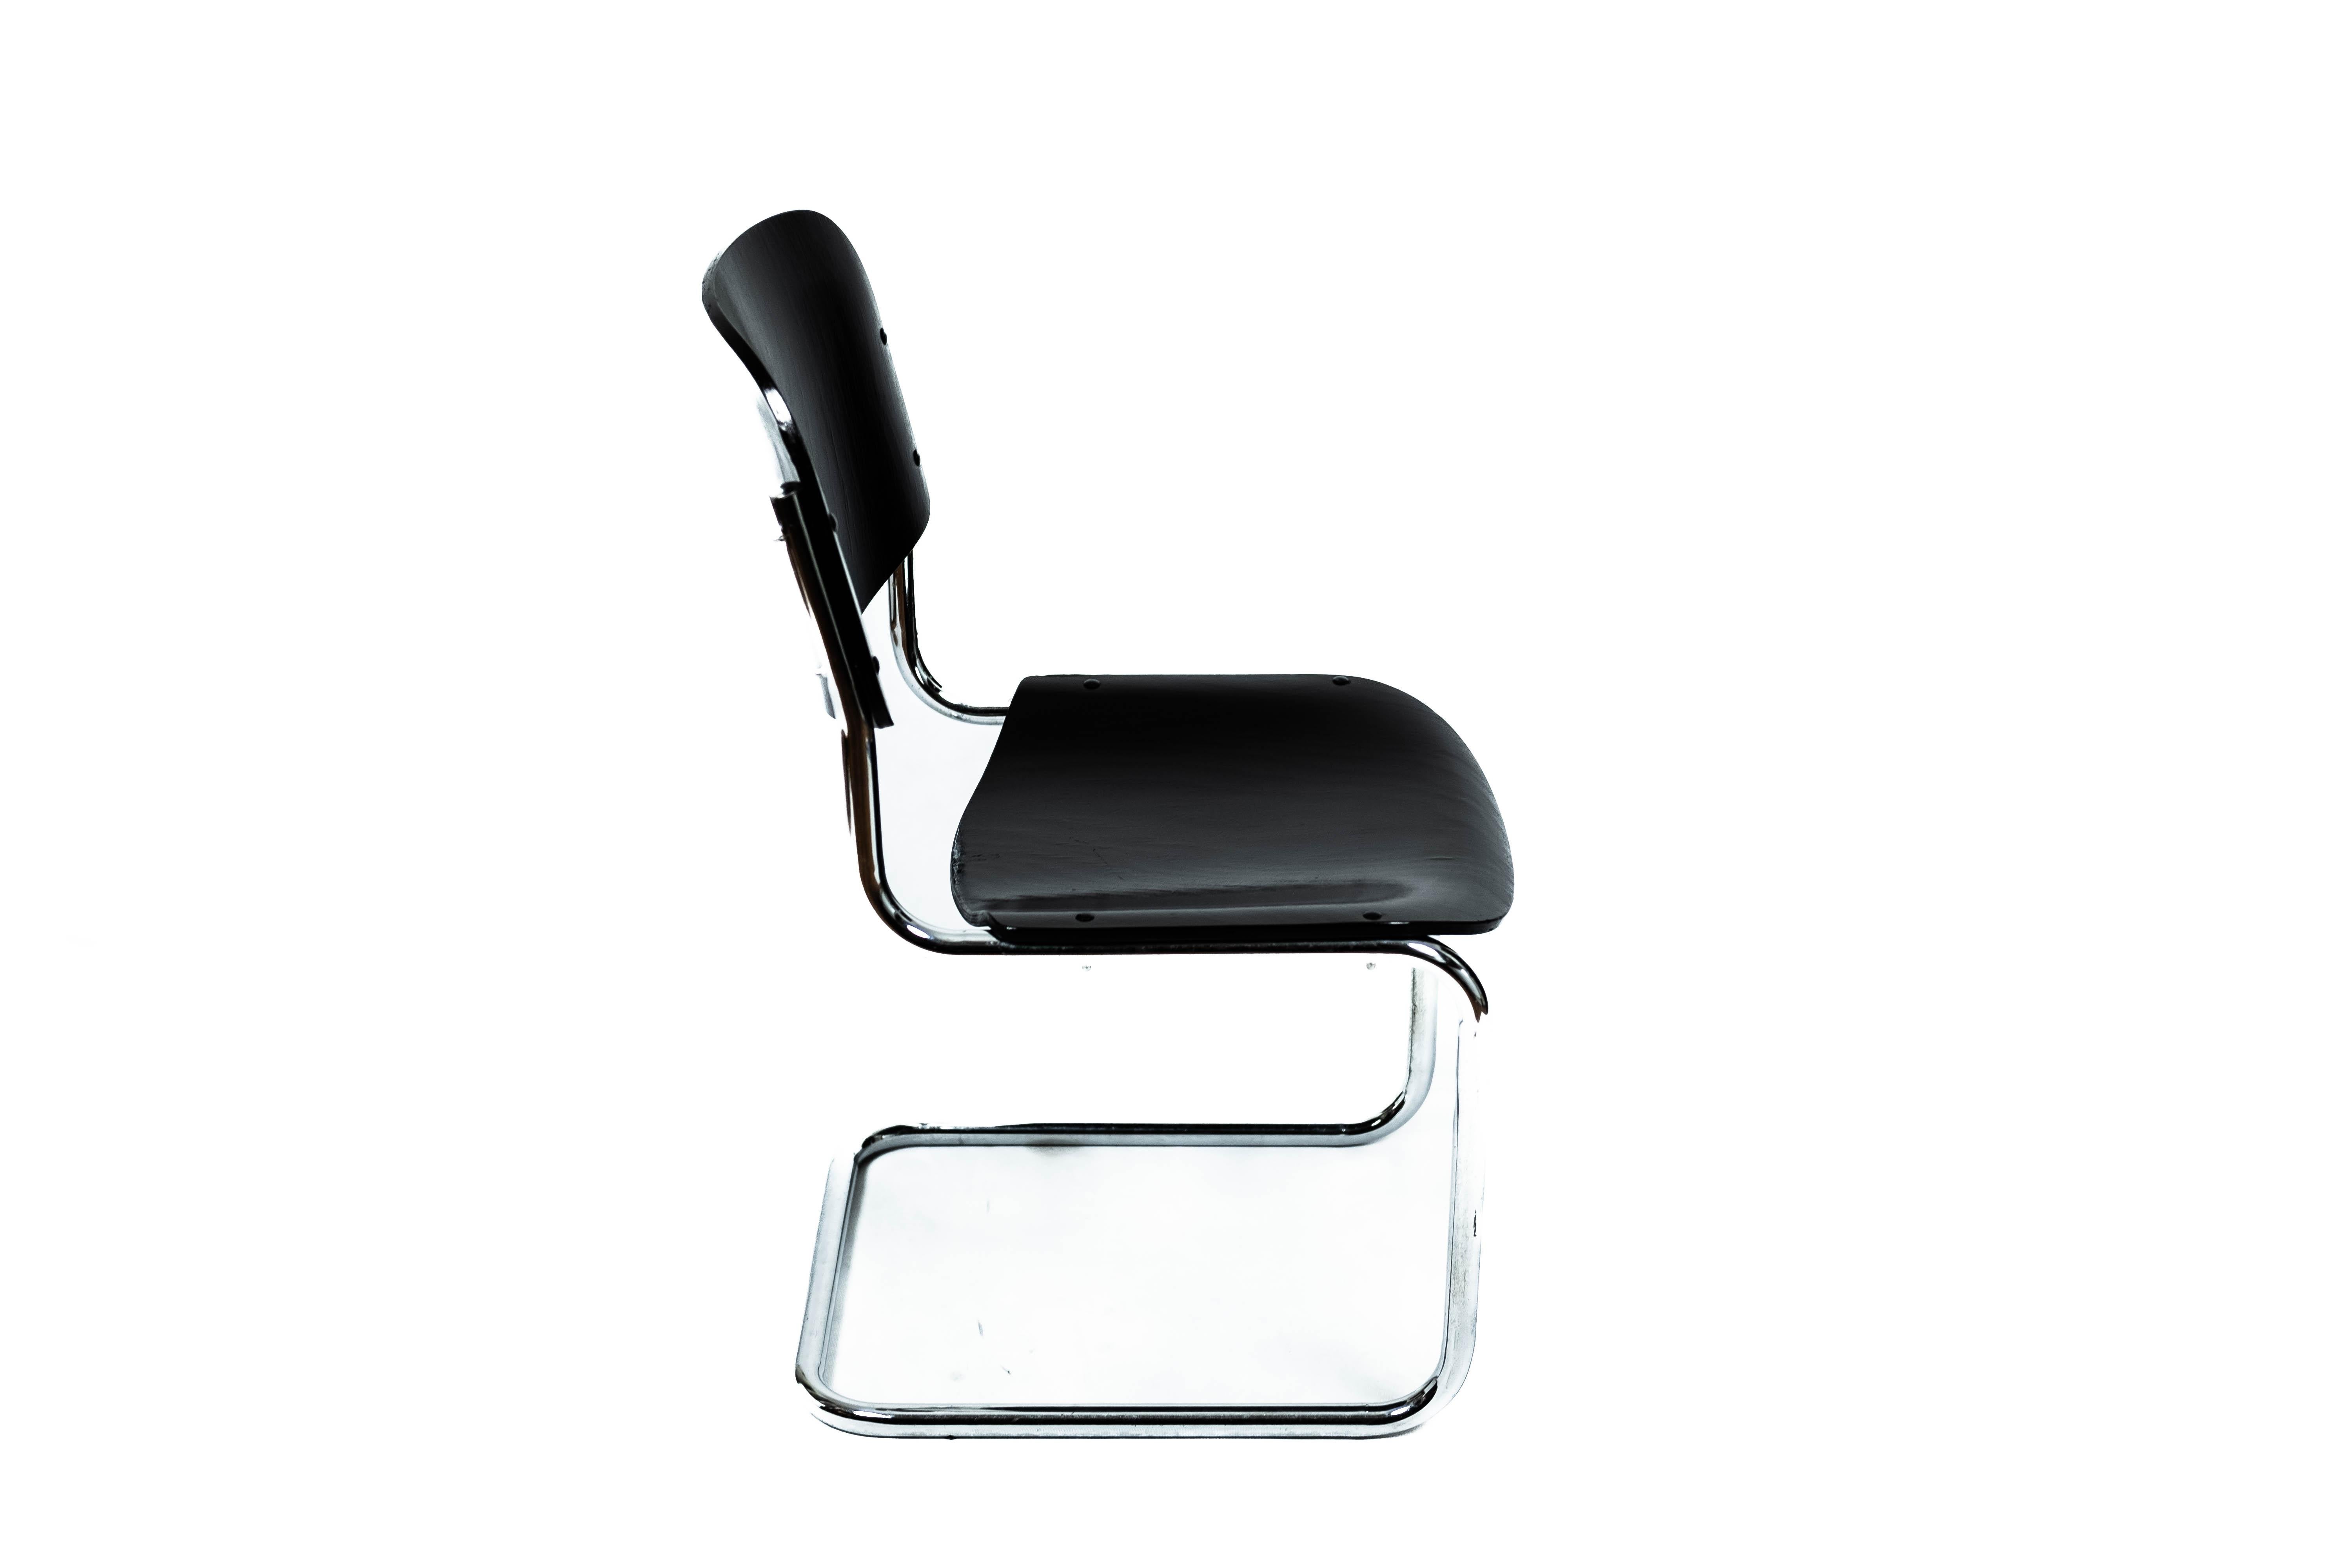 Late 20th Century Black Steelpipe Chair in Bauhaus-Style (Vienna, 1970) For Sale